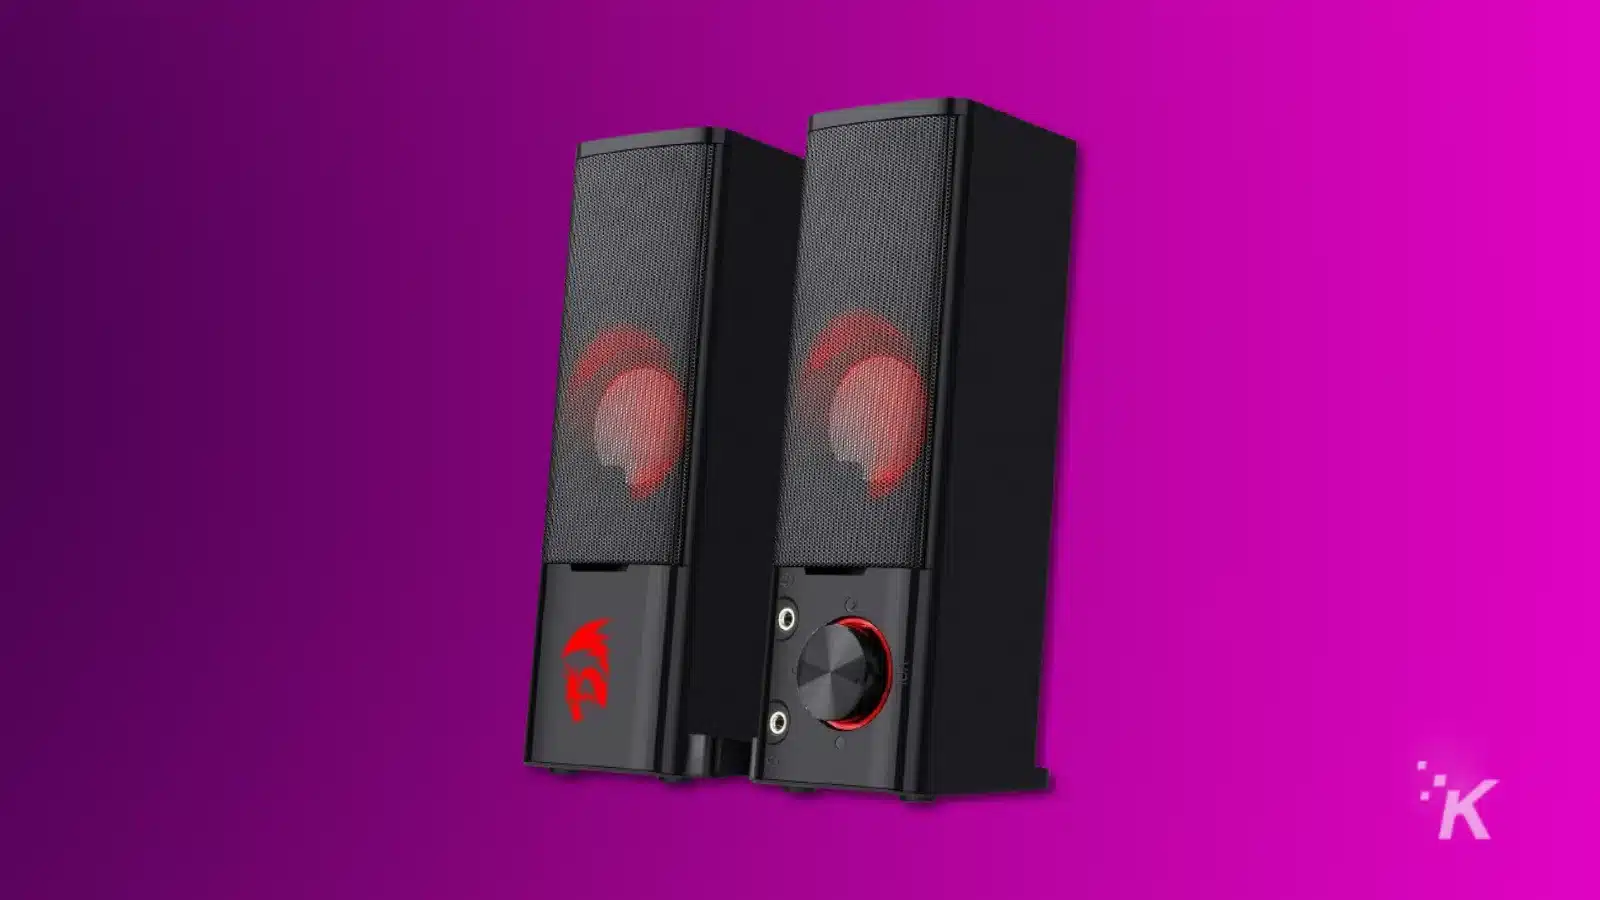 Render of redragon g550 gaming speakers on a purple background